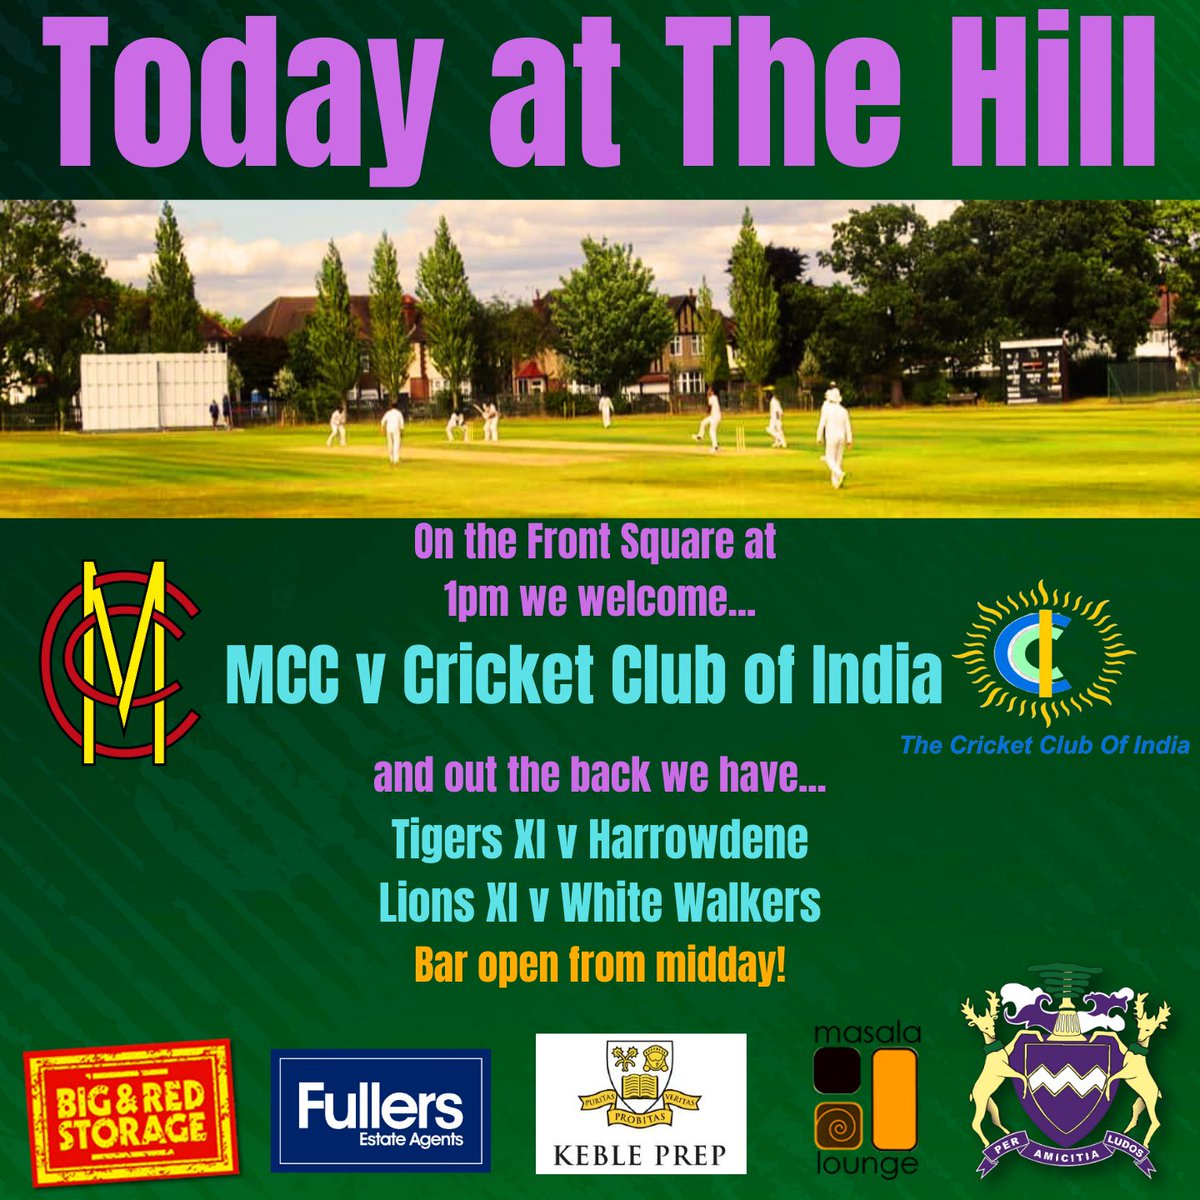 We extend a warm welcome to the MCC and the Cricket Club of India who play at our ground today. Yesterdays rain means a delayed start of 1pm...
.
.
.
#Cricket #LoveCricket #London #Middlesex #Cricketer #JoeRoot #ViratKohli #T20Cricket #MCC #CricketClubofIndia